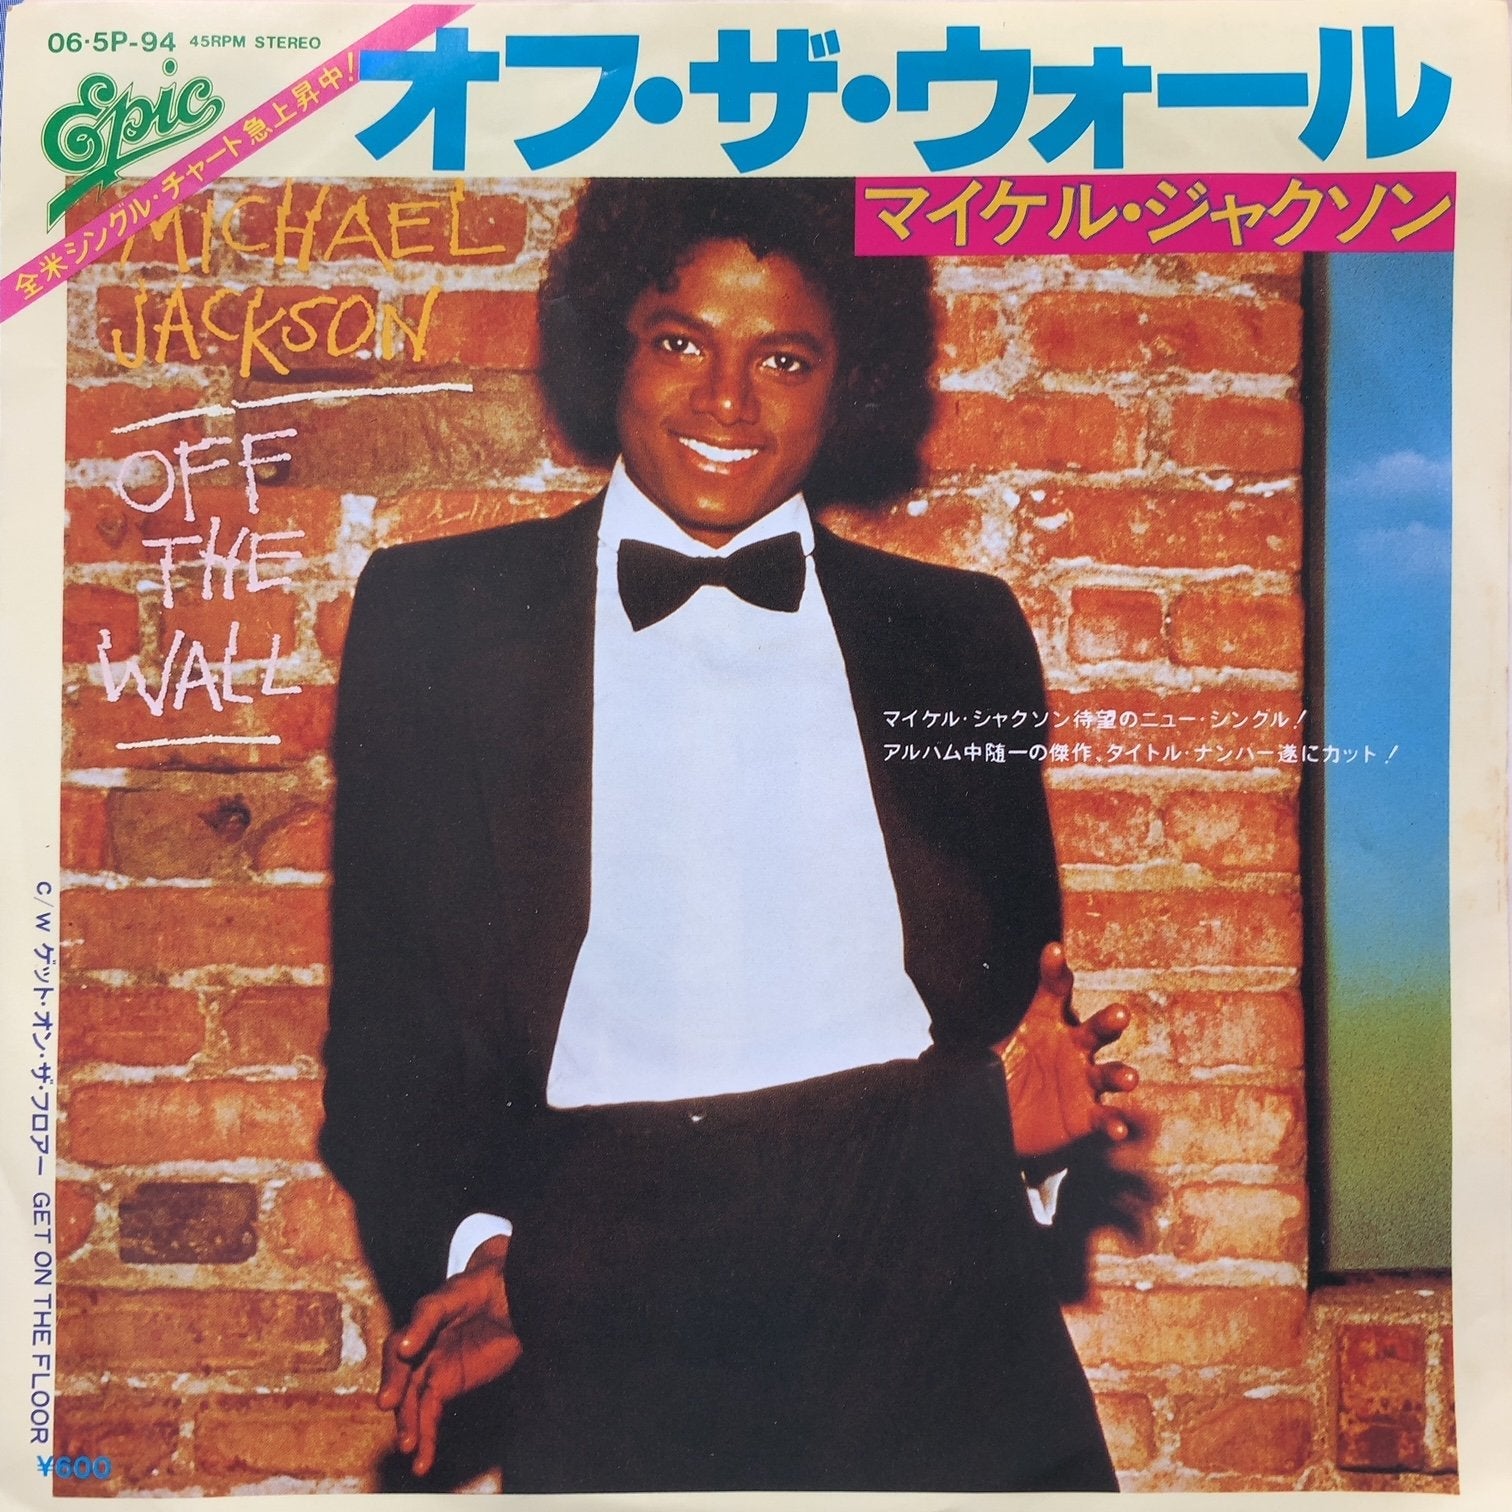 MICHAEL JACKSON / OFF THE WALL (06・5P-94) 7inch